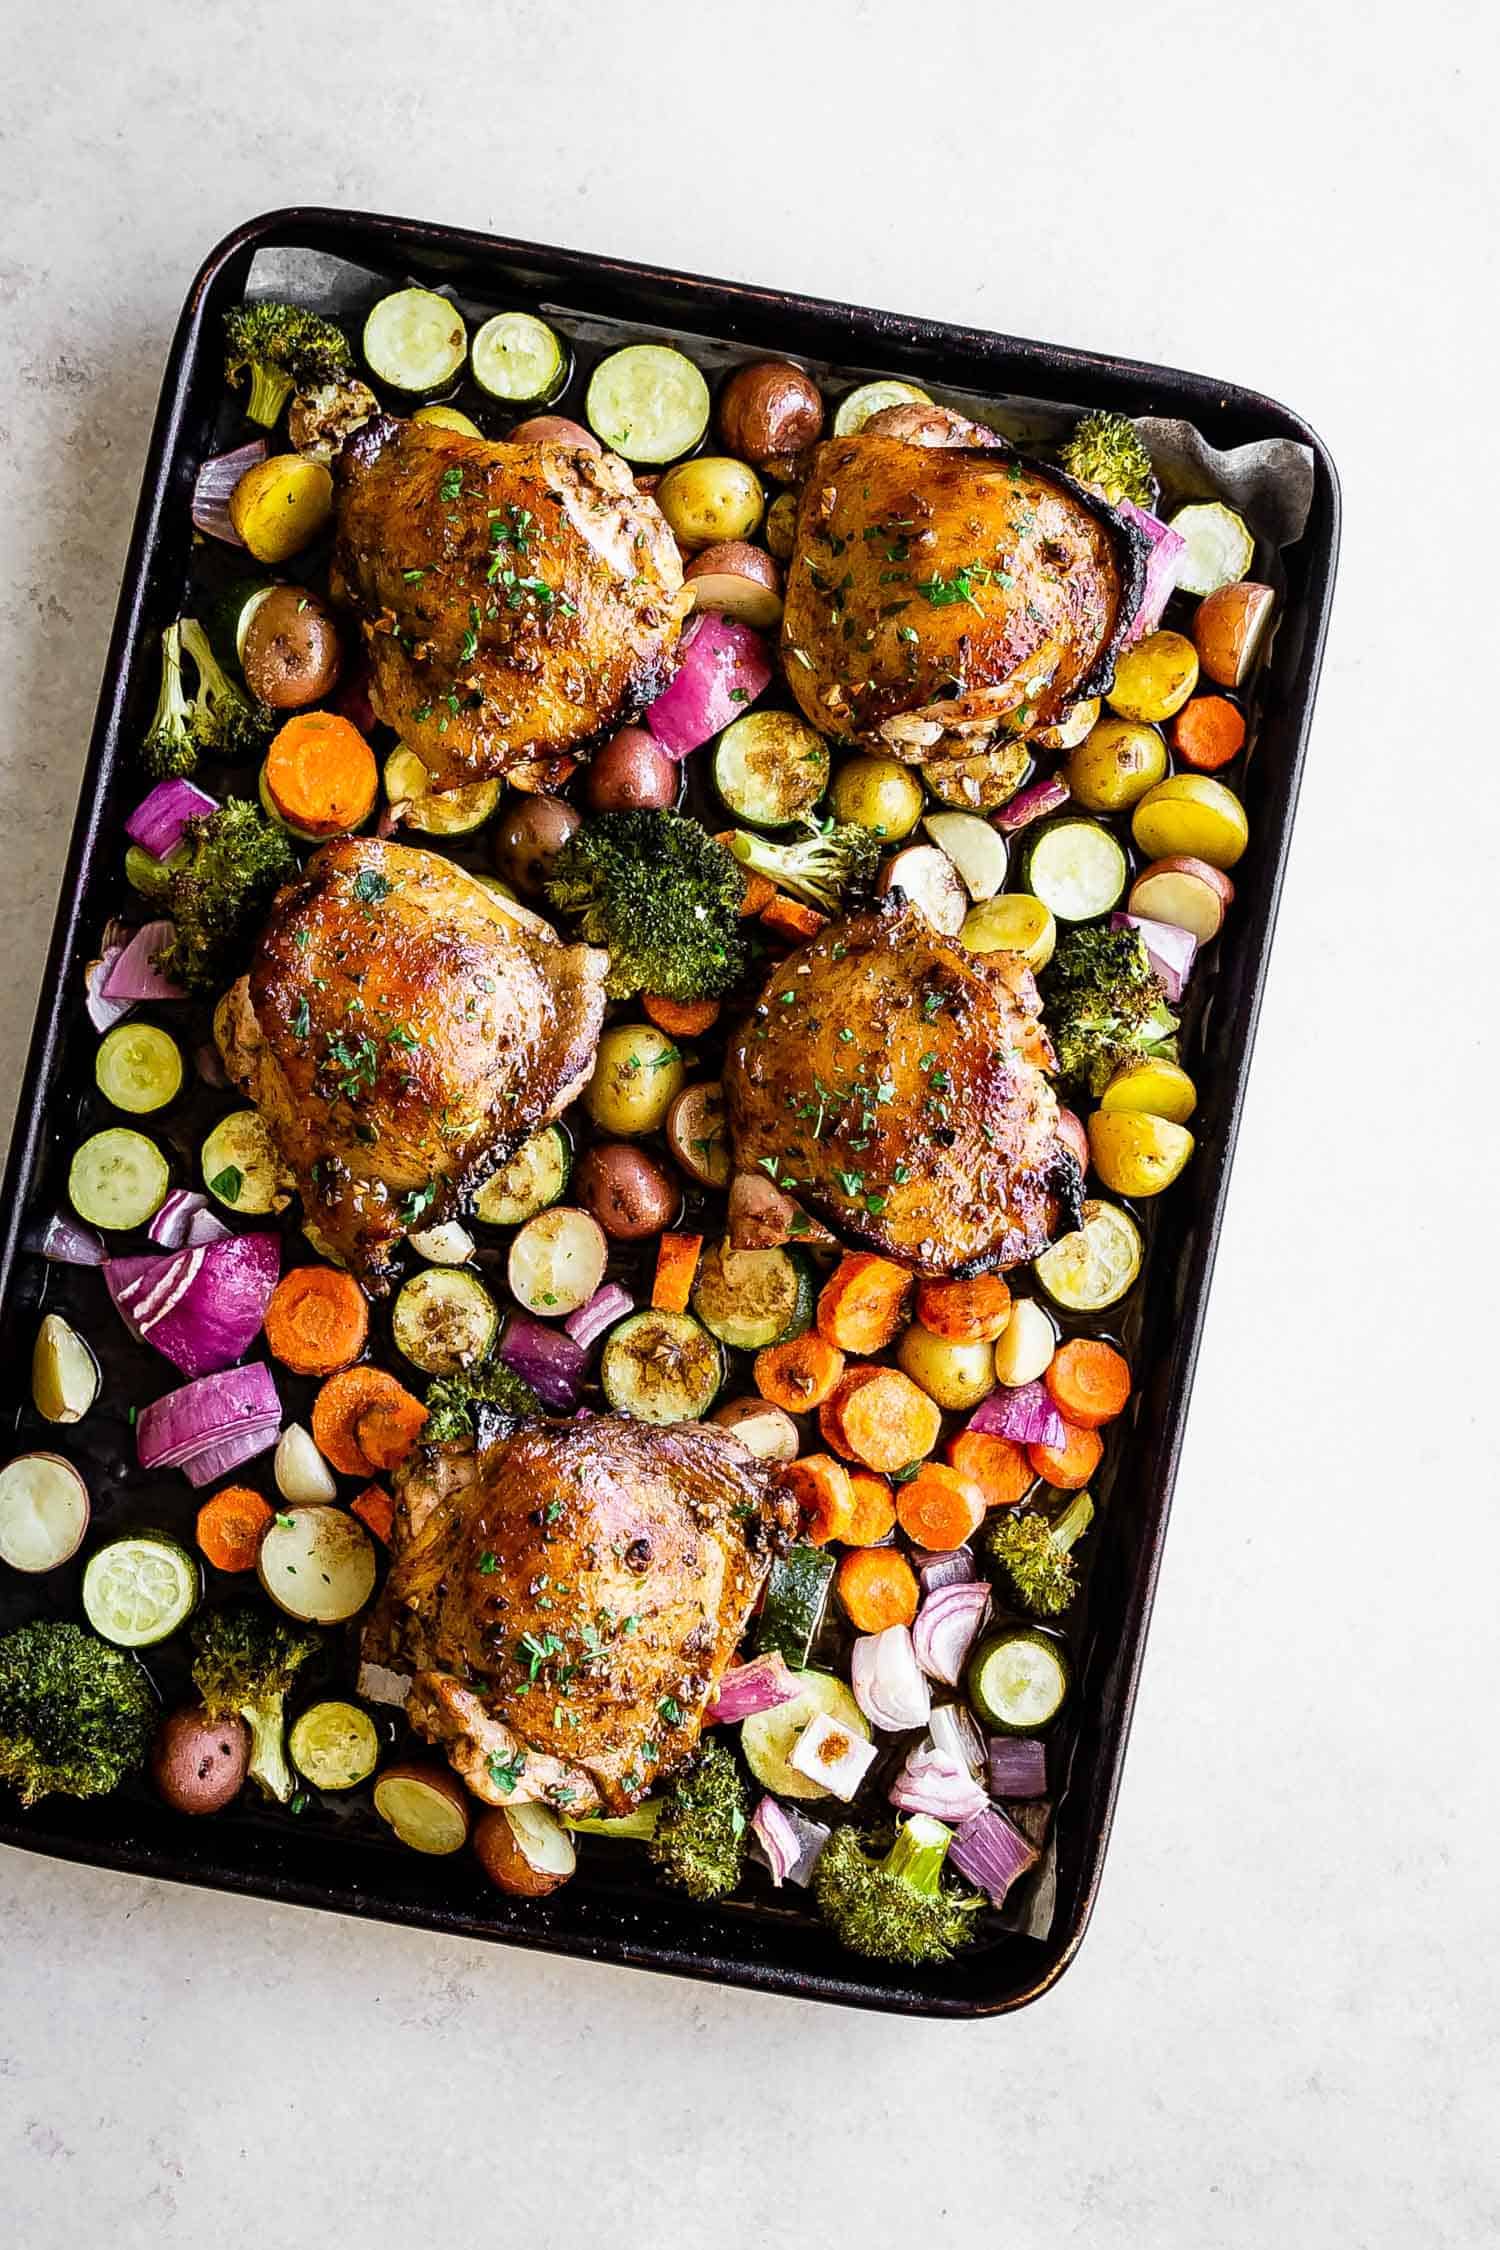 sheet pan full of roasted veggies and crispy chicken thighs